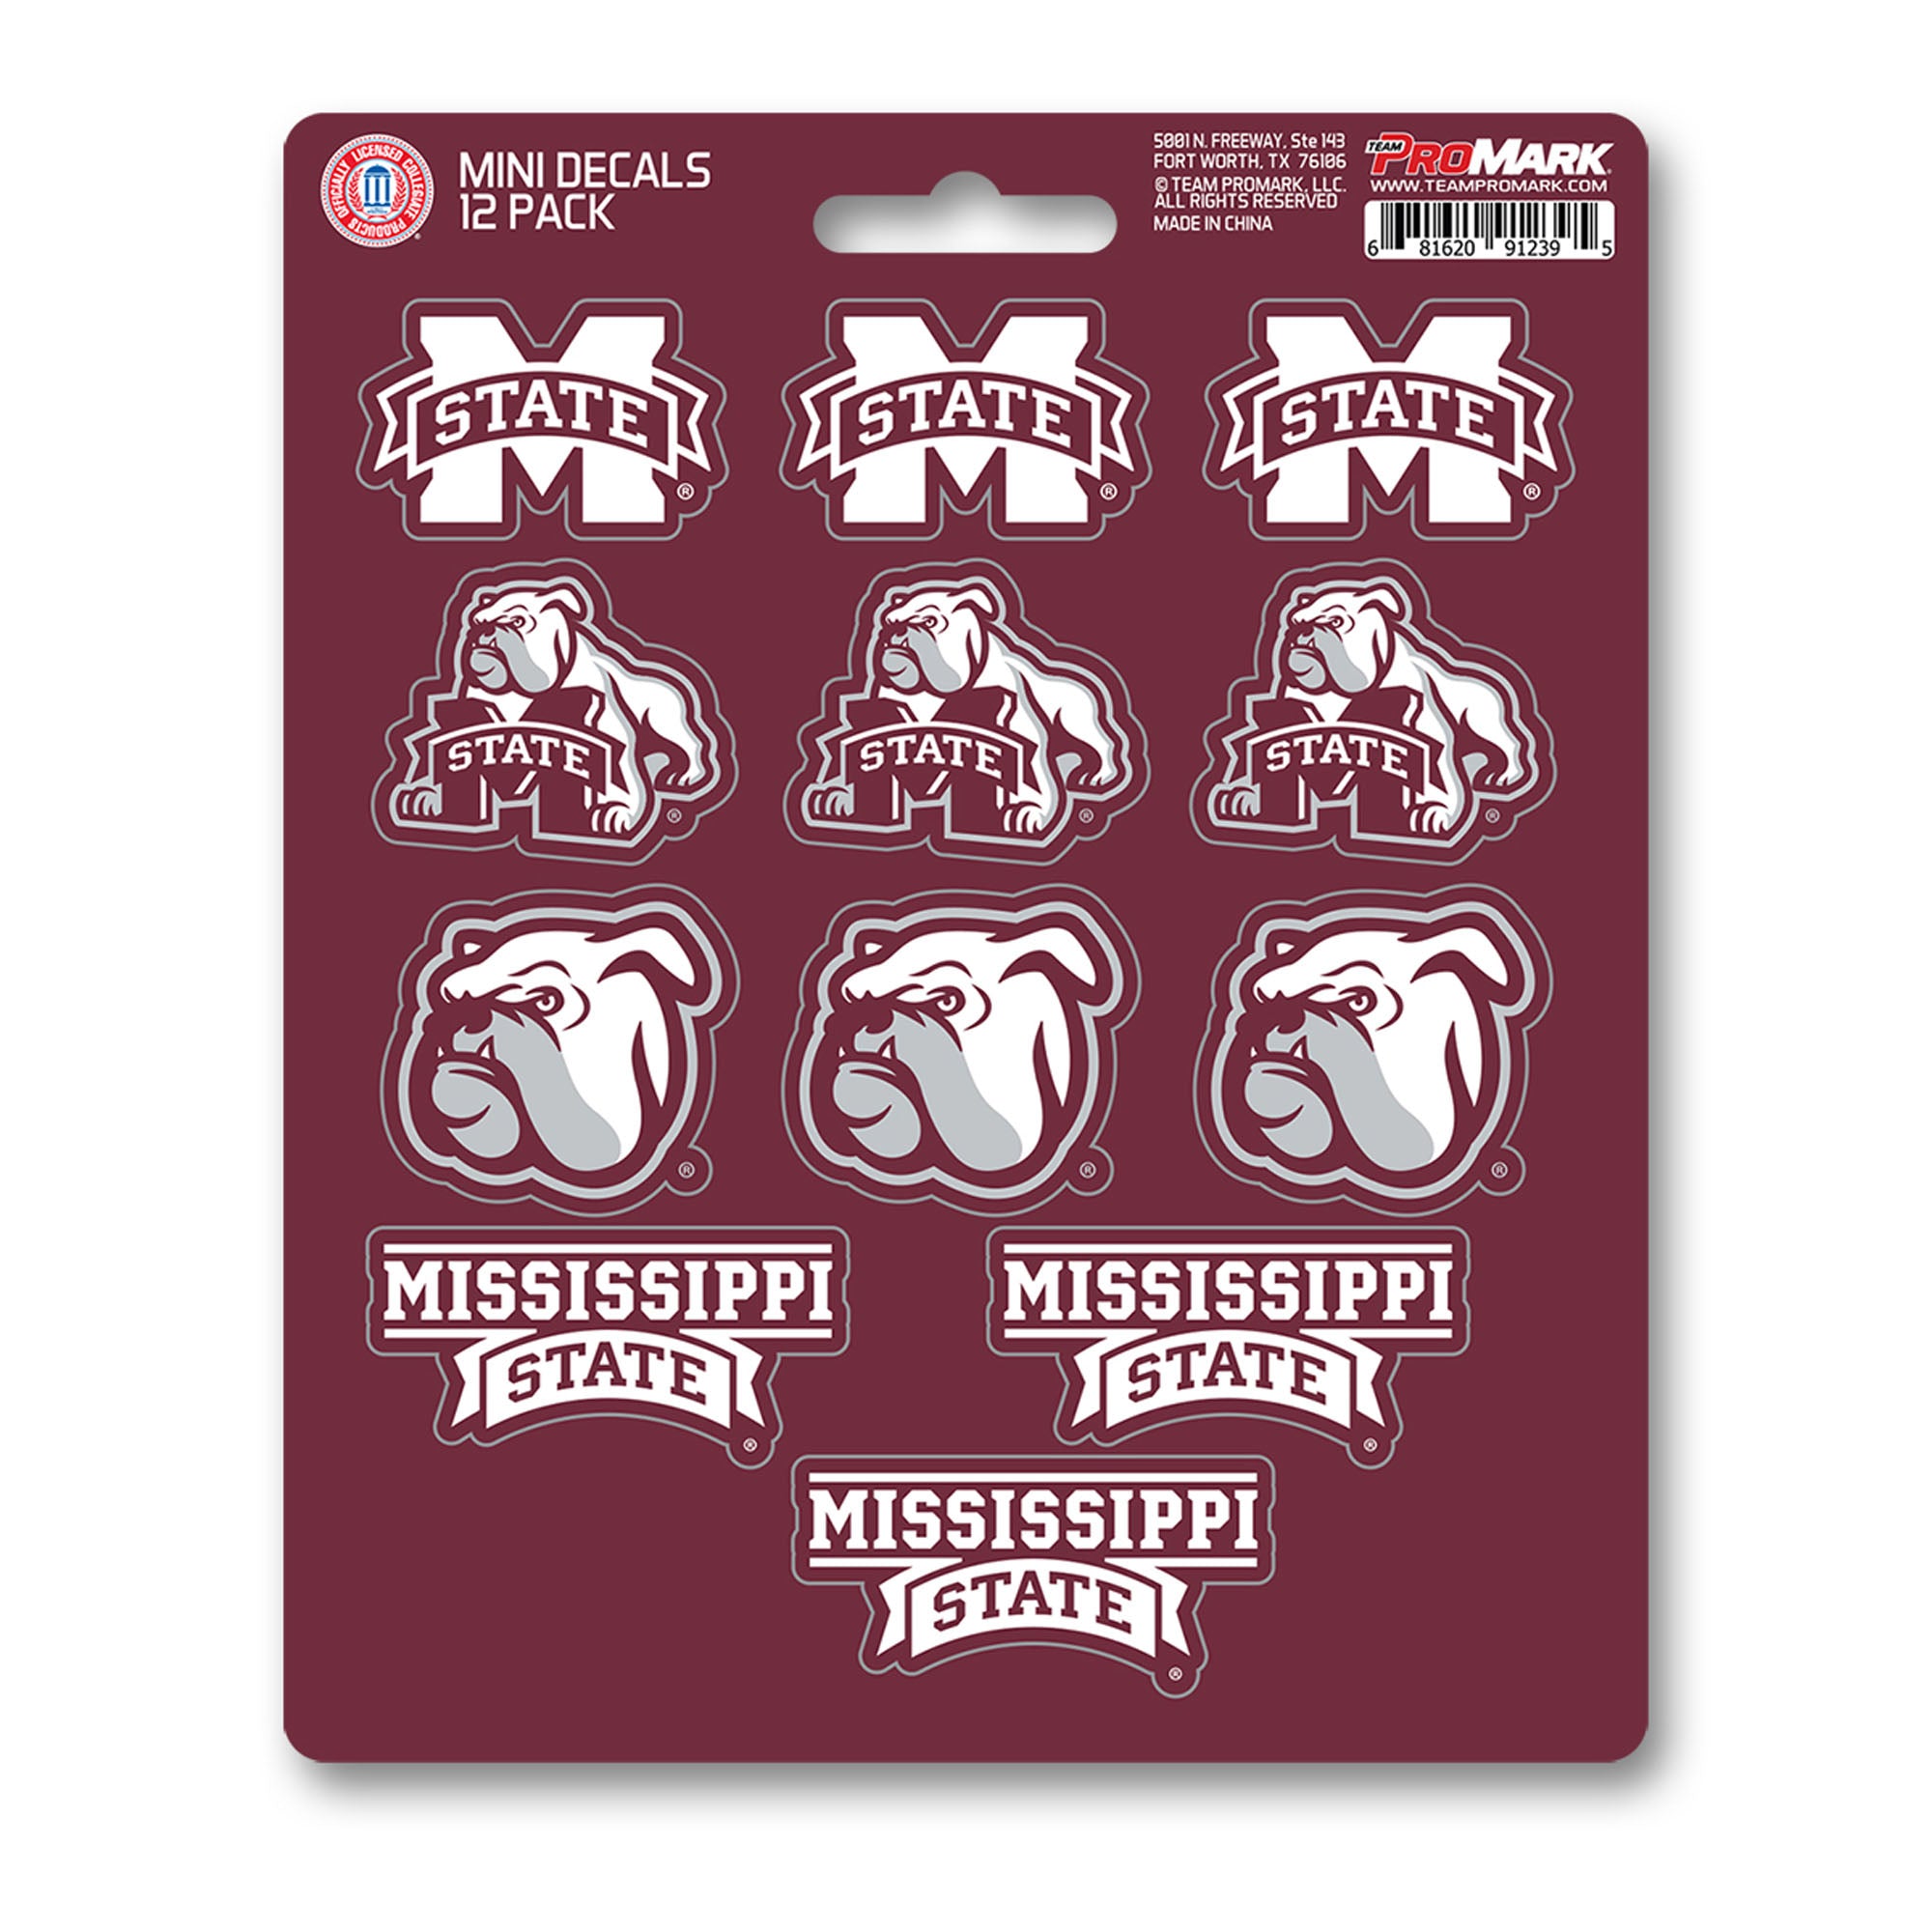 FANMATS, Mississippi State University 12 Count Mini Decal Sticker Pack